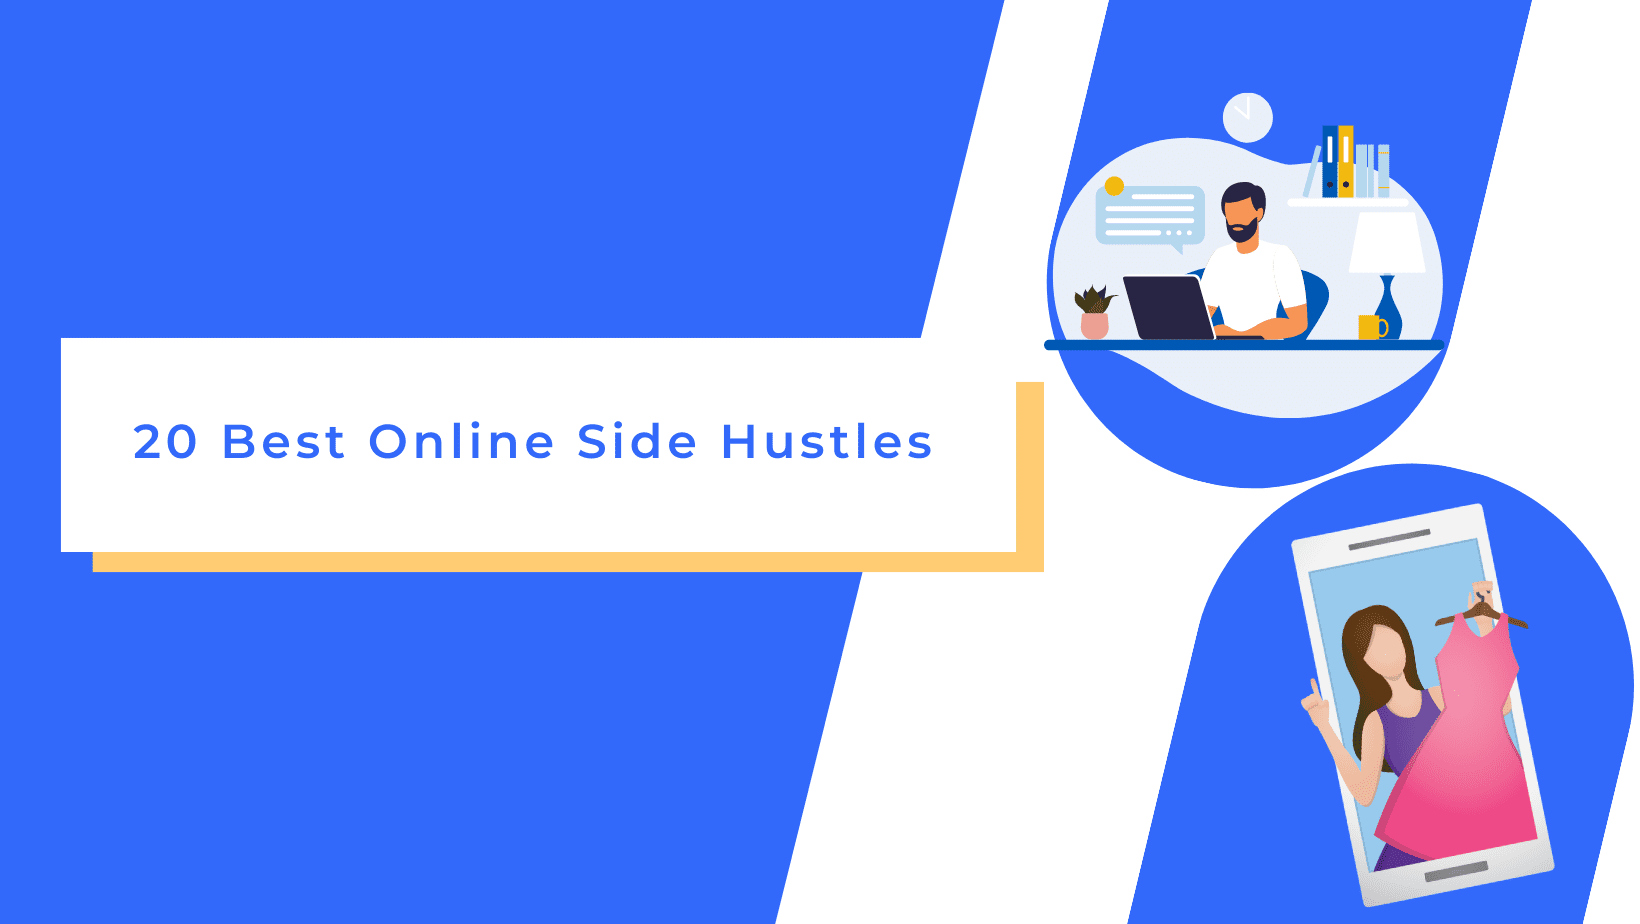 The best online side hustles featuring working as a VA and online selling.